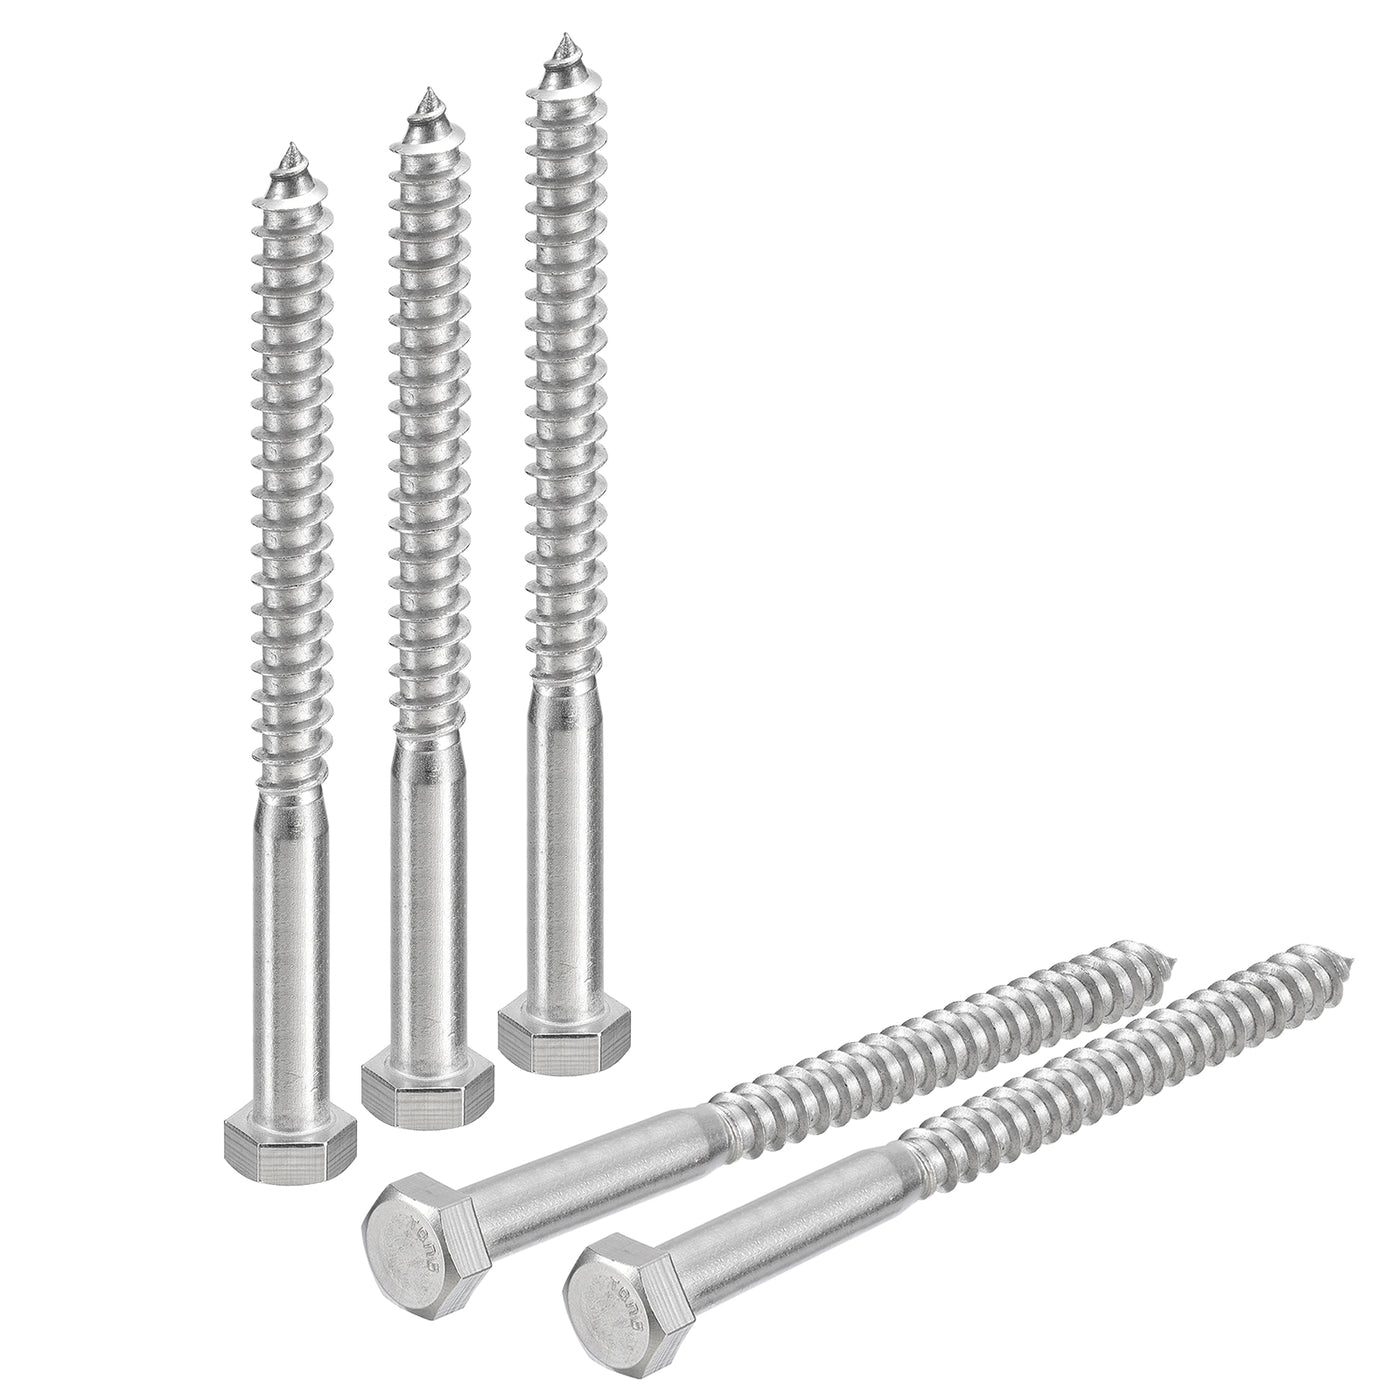 uxcell Uxcell Hex Head Lag Screws Bolts, 5pcs 3/8" x 5" 304 Stainless Steel Wood Screws